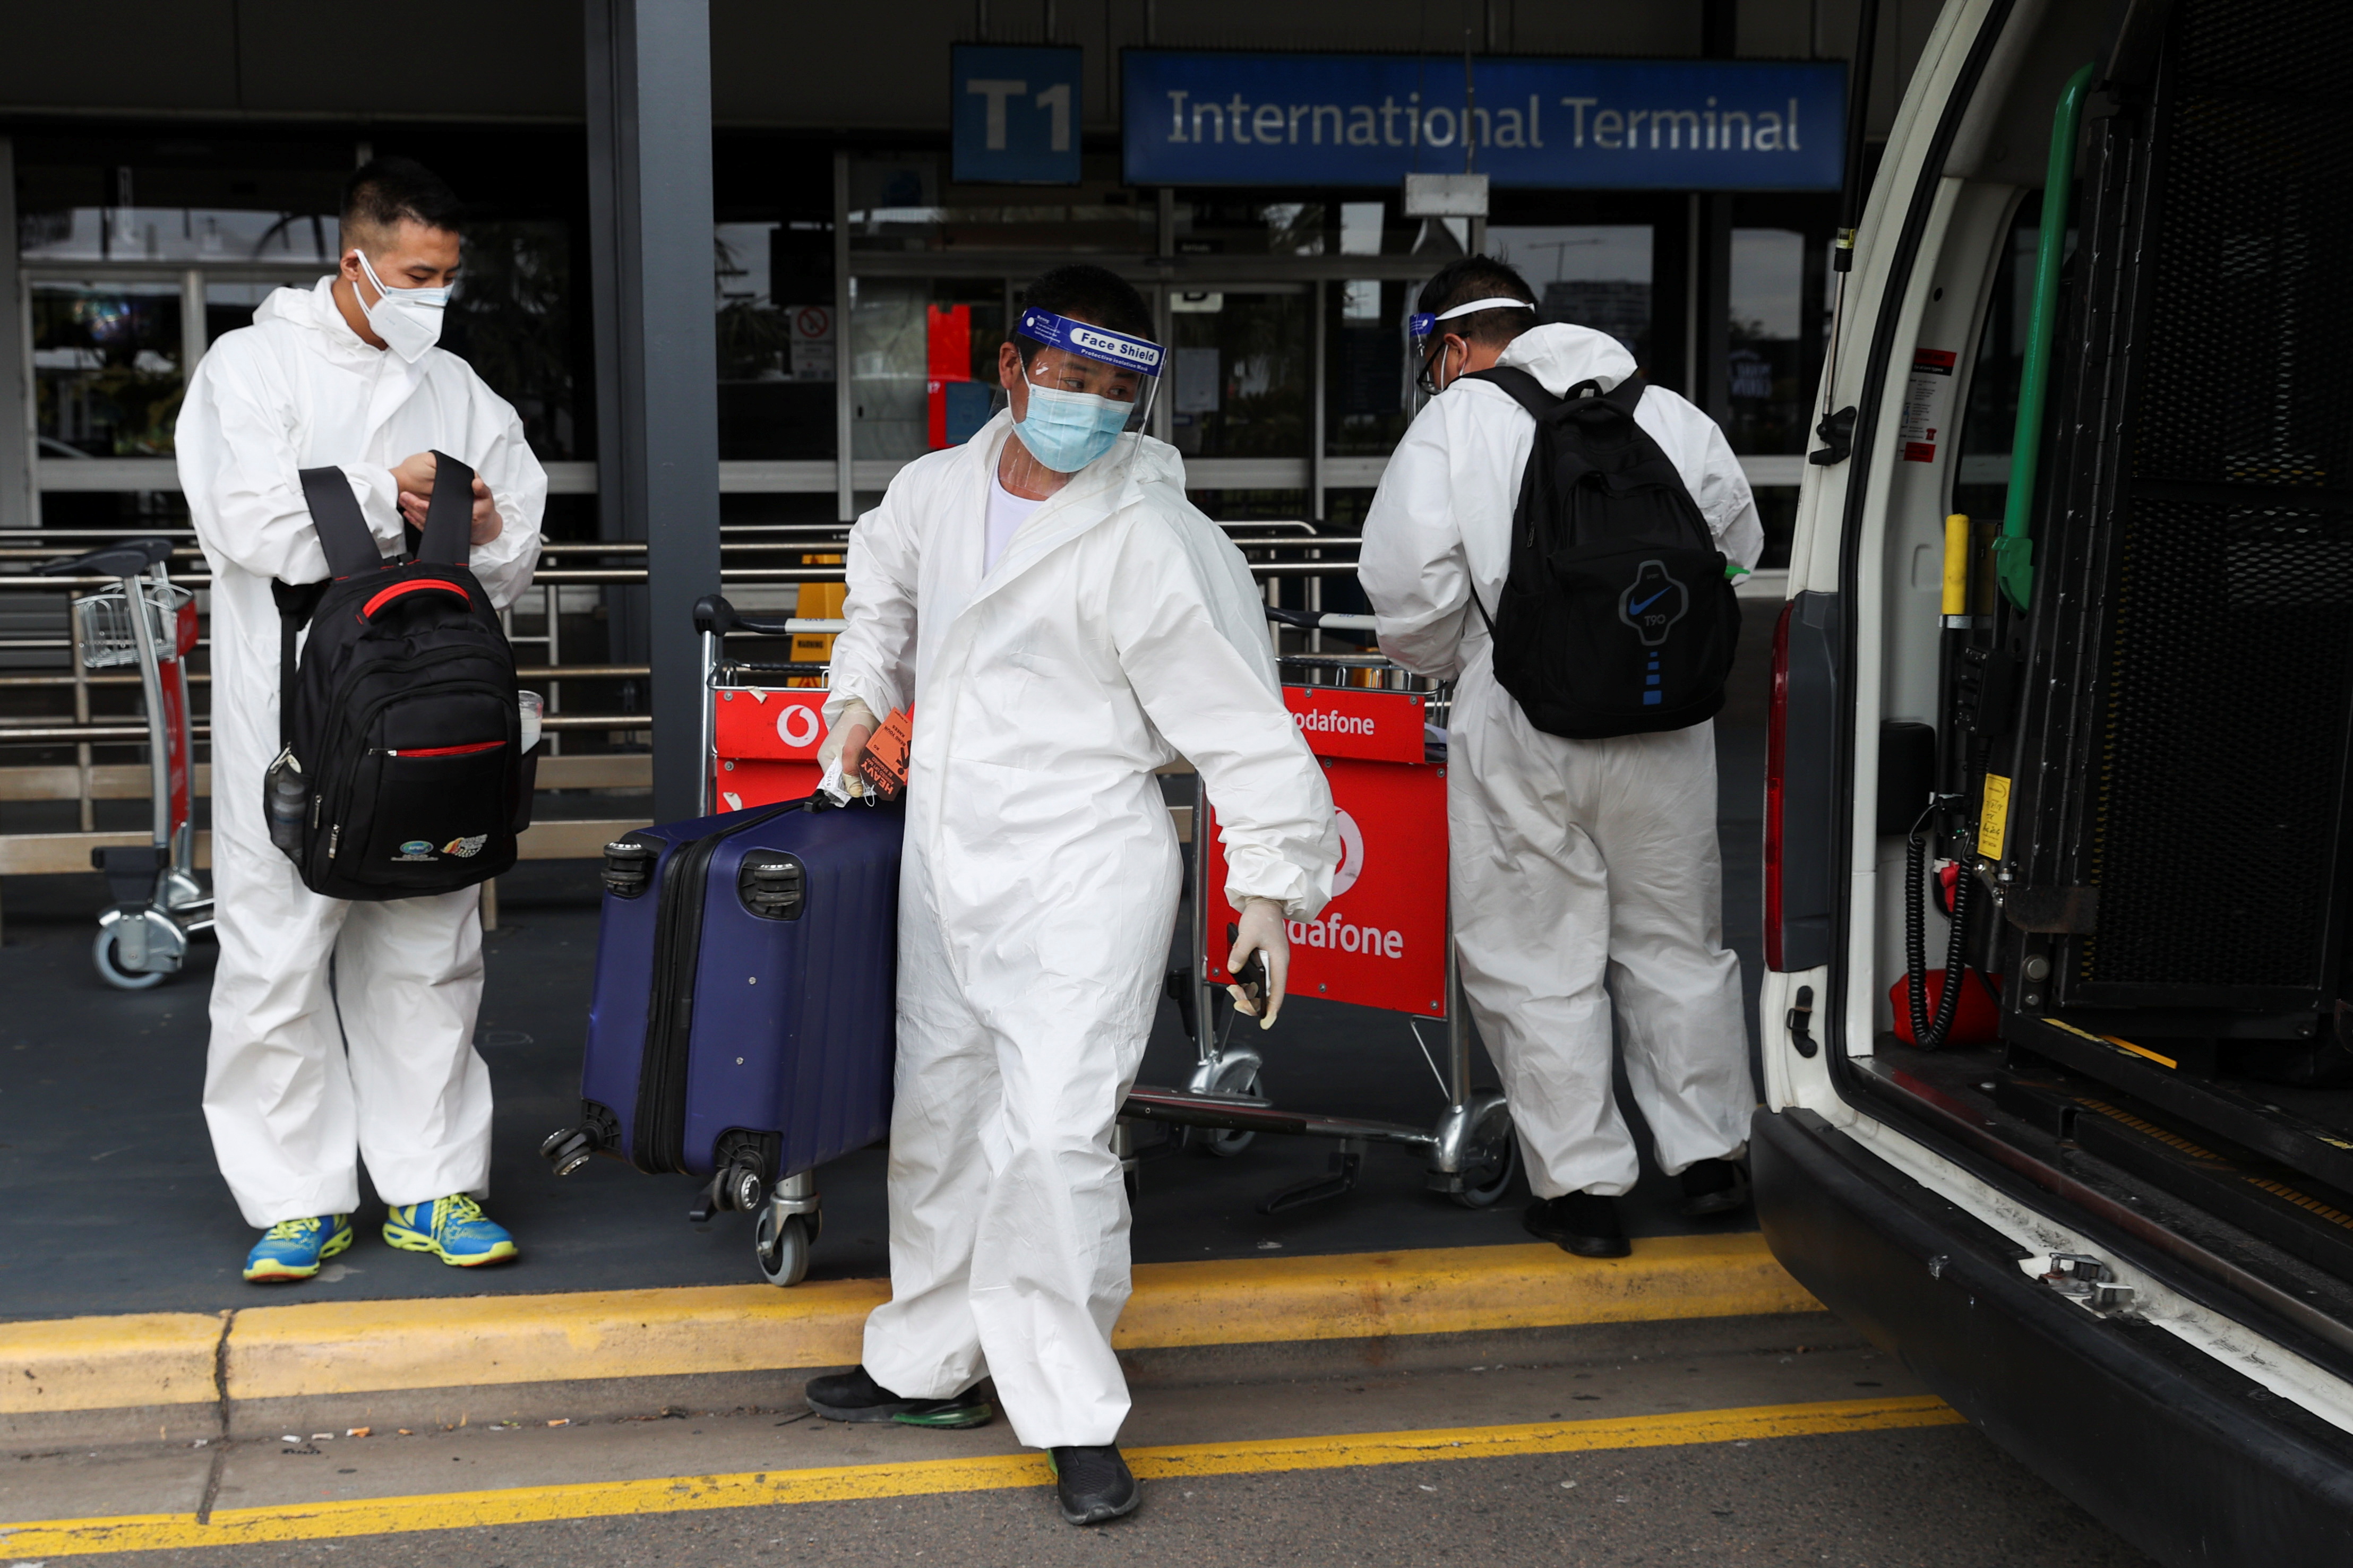 Travellers in personal protective equipment load luggage into a taxi outside the international terminal at Sydney Airport, as countries react to the new coronavirus Omicron variant amid the coronavirus disease (COVID-19) pandemic, in Sydney, Australia, November 29, 2021.  REUTERS/Loren Elliott